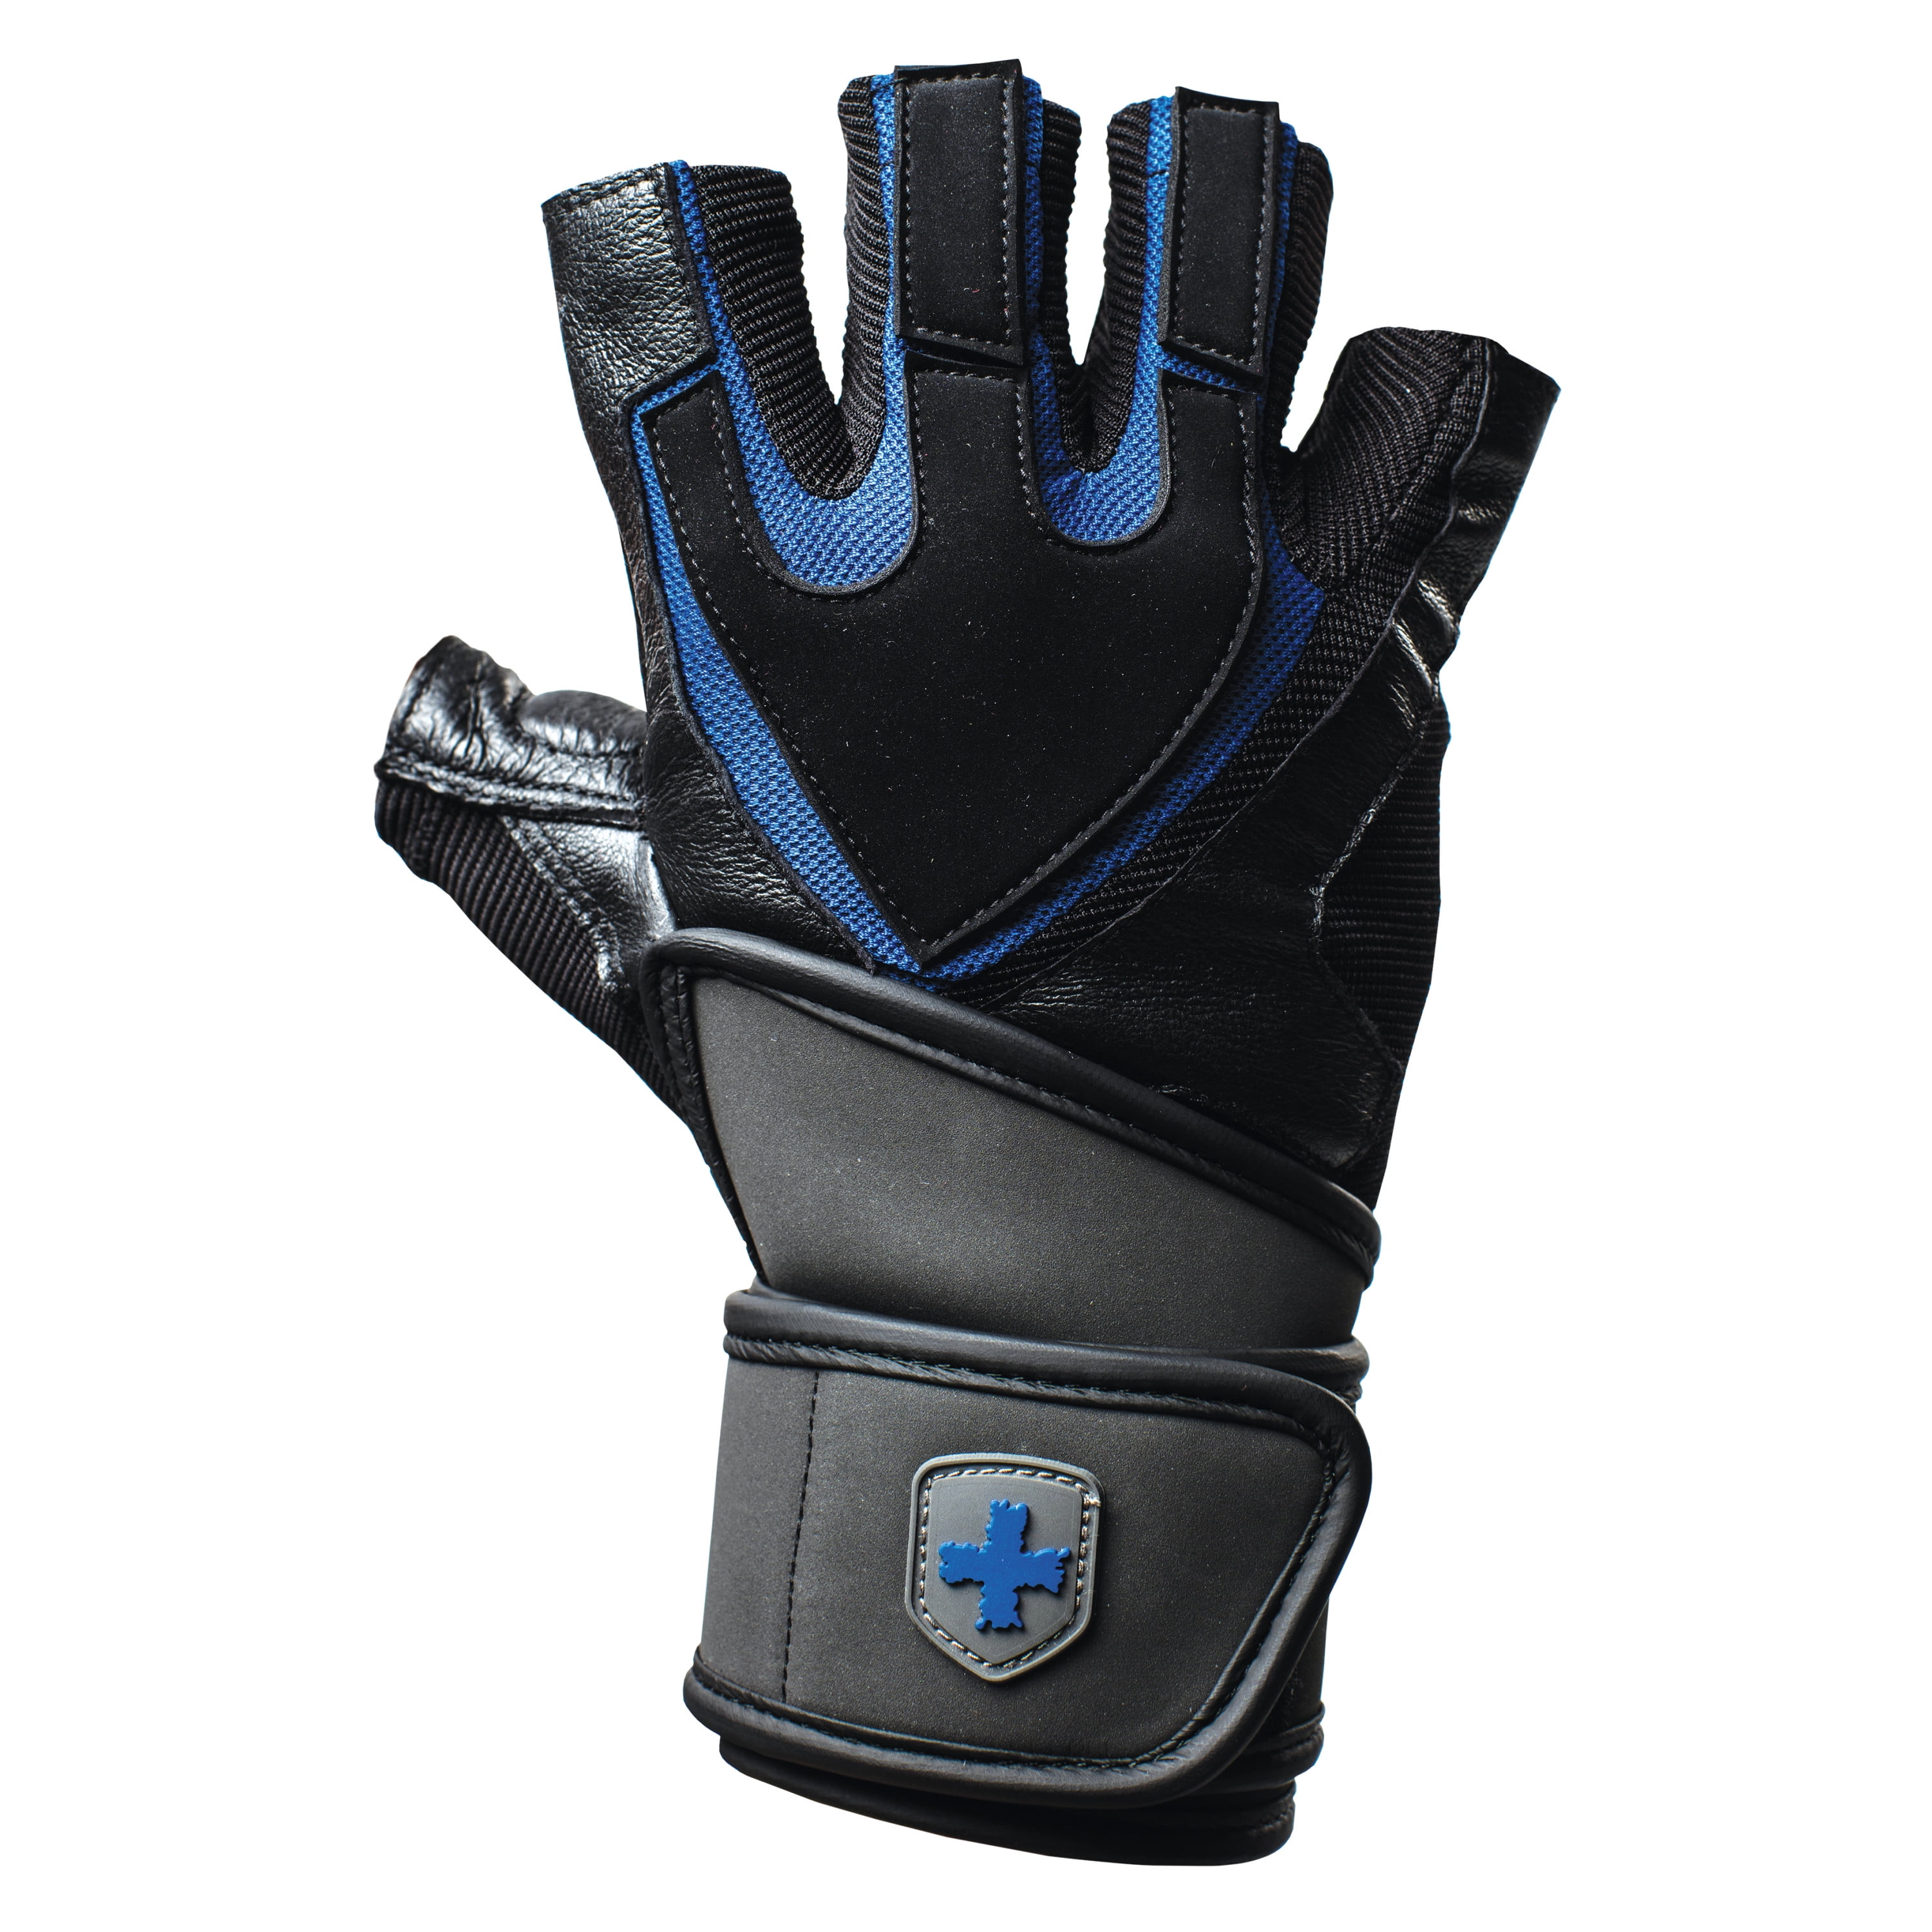 Harbinger Training Grip Weight Lifting Gloves Small Black/ Blue.126012 